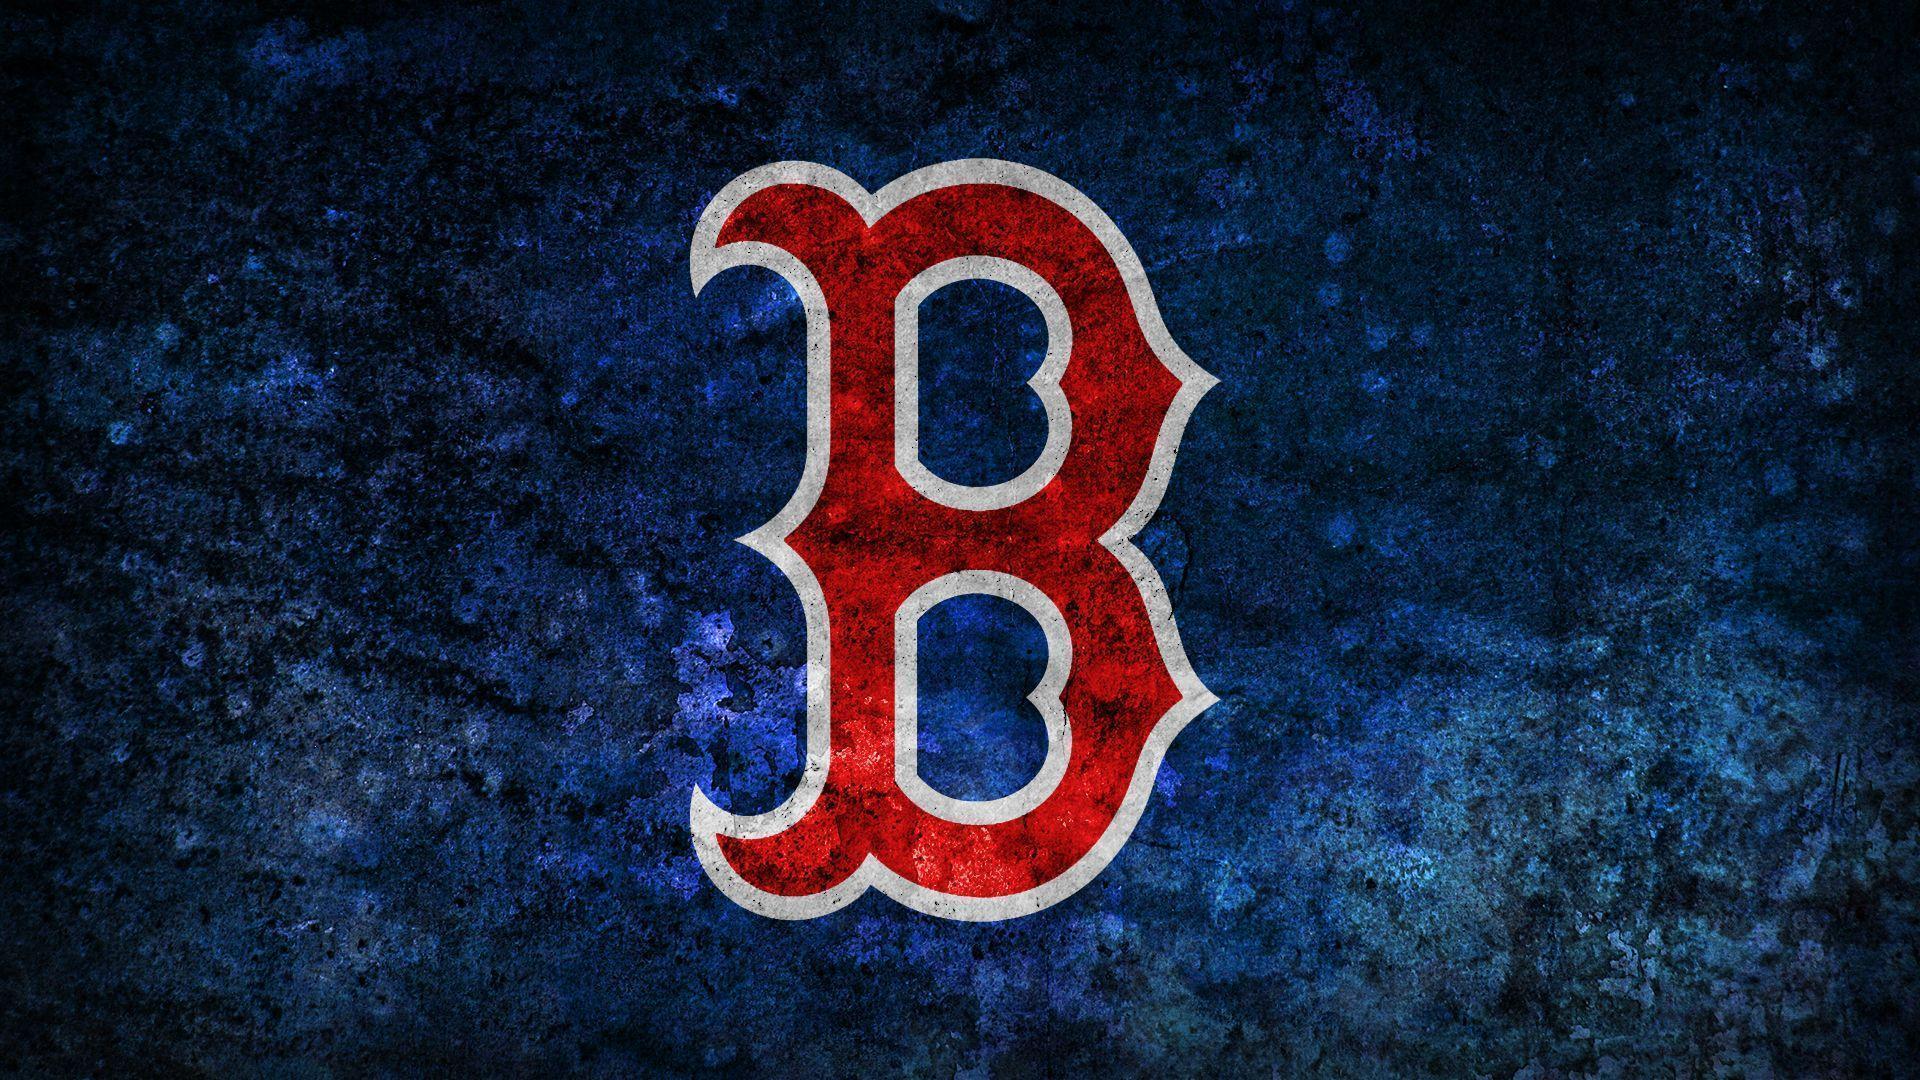 Image] Some wallpapers I made. Naturally they are Red Sox